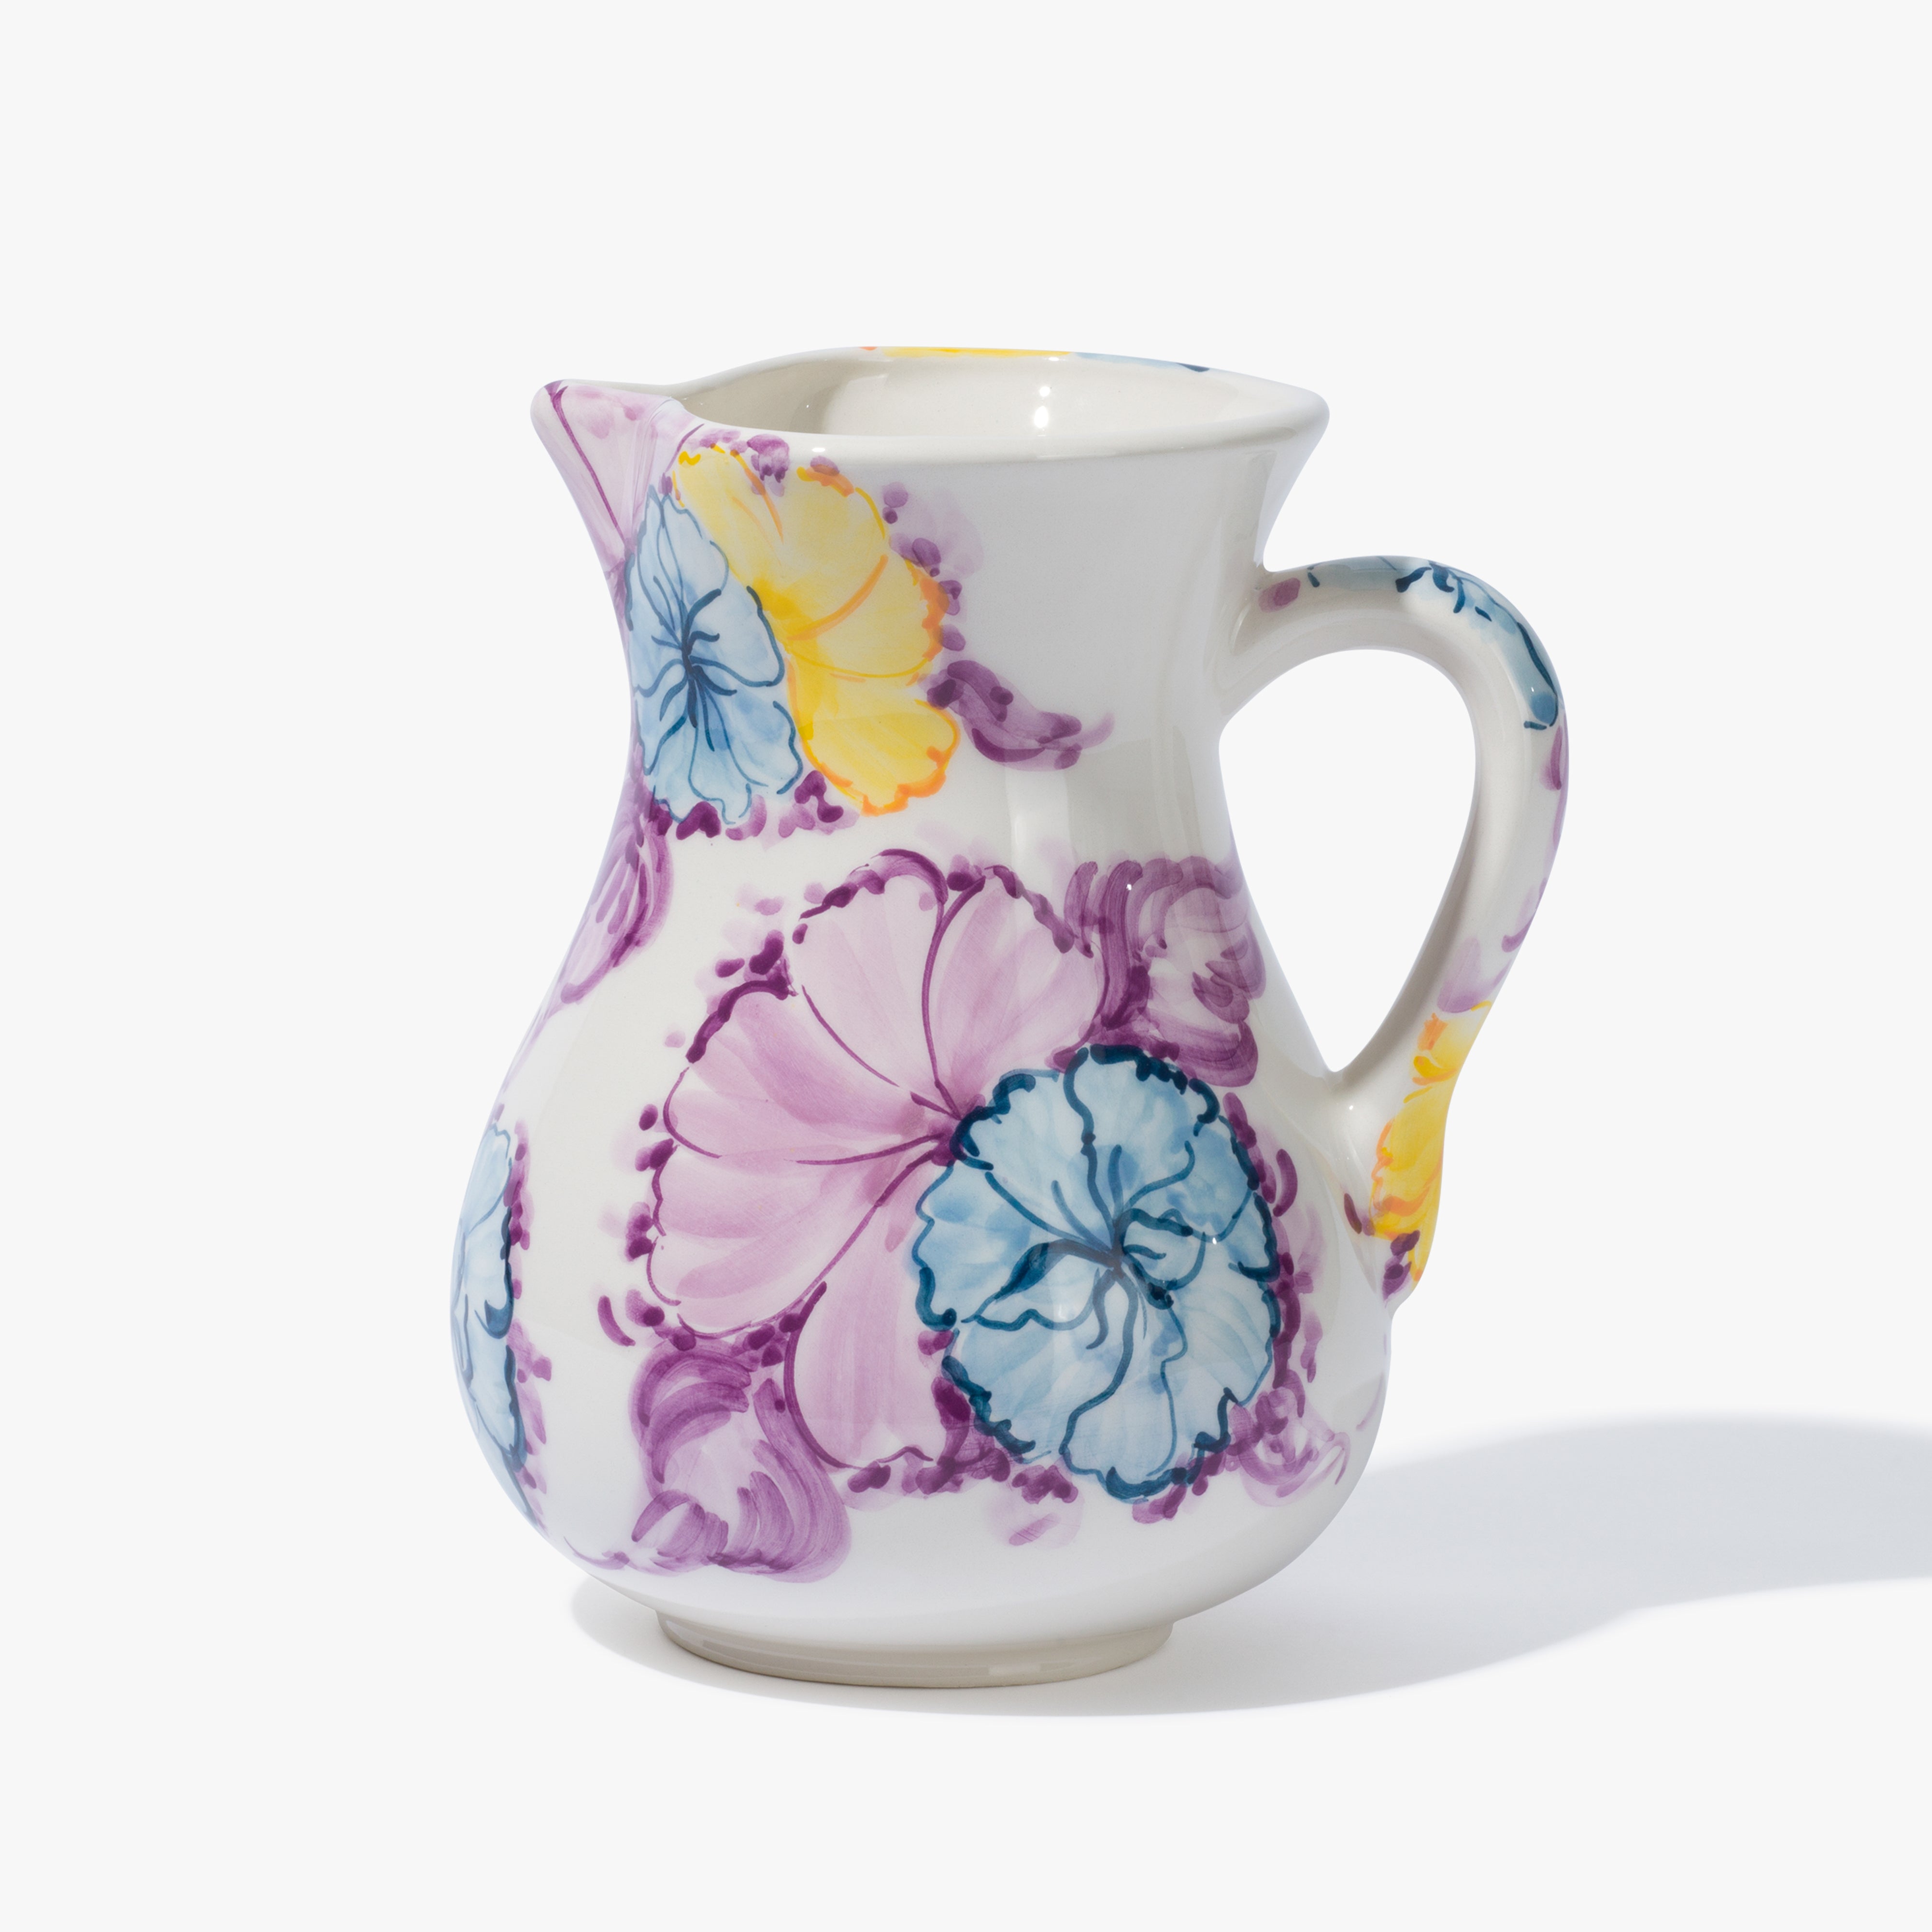 A vaisselle jughead just which is a classic jug shape with a handle and a unique hand-painted watercolour floral design in blue, lavender and yellow. 